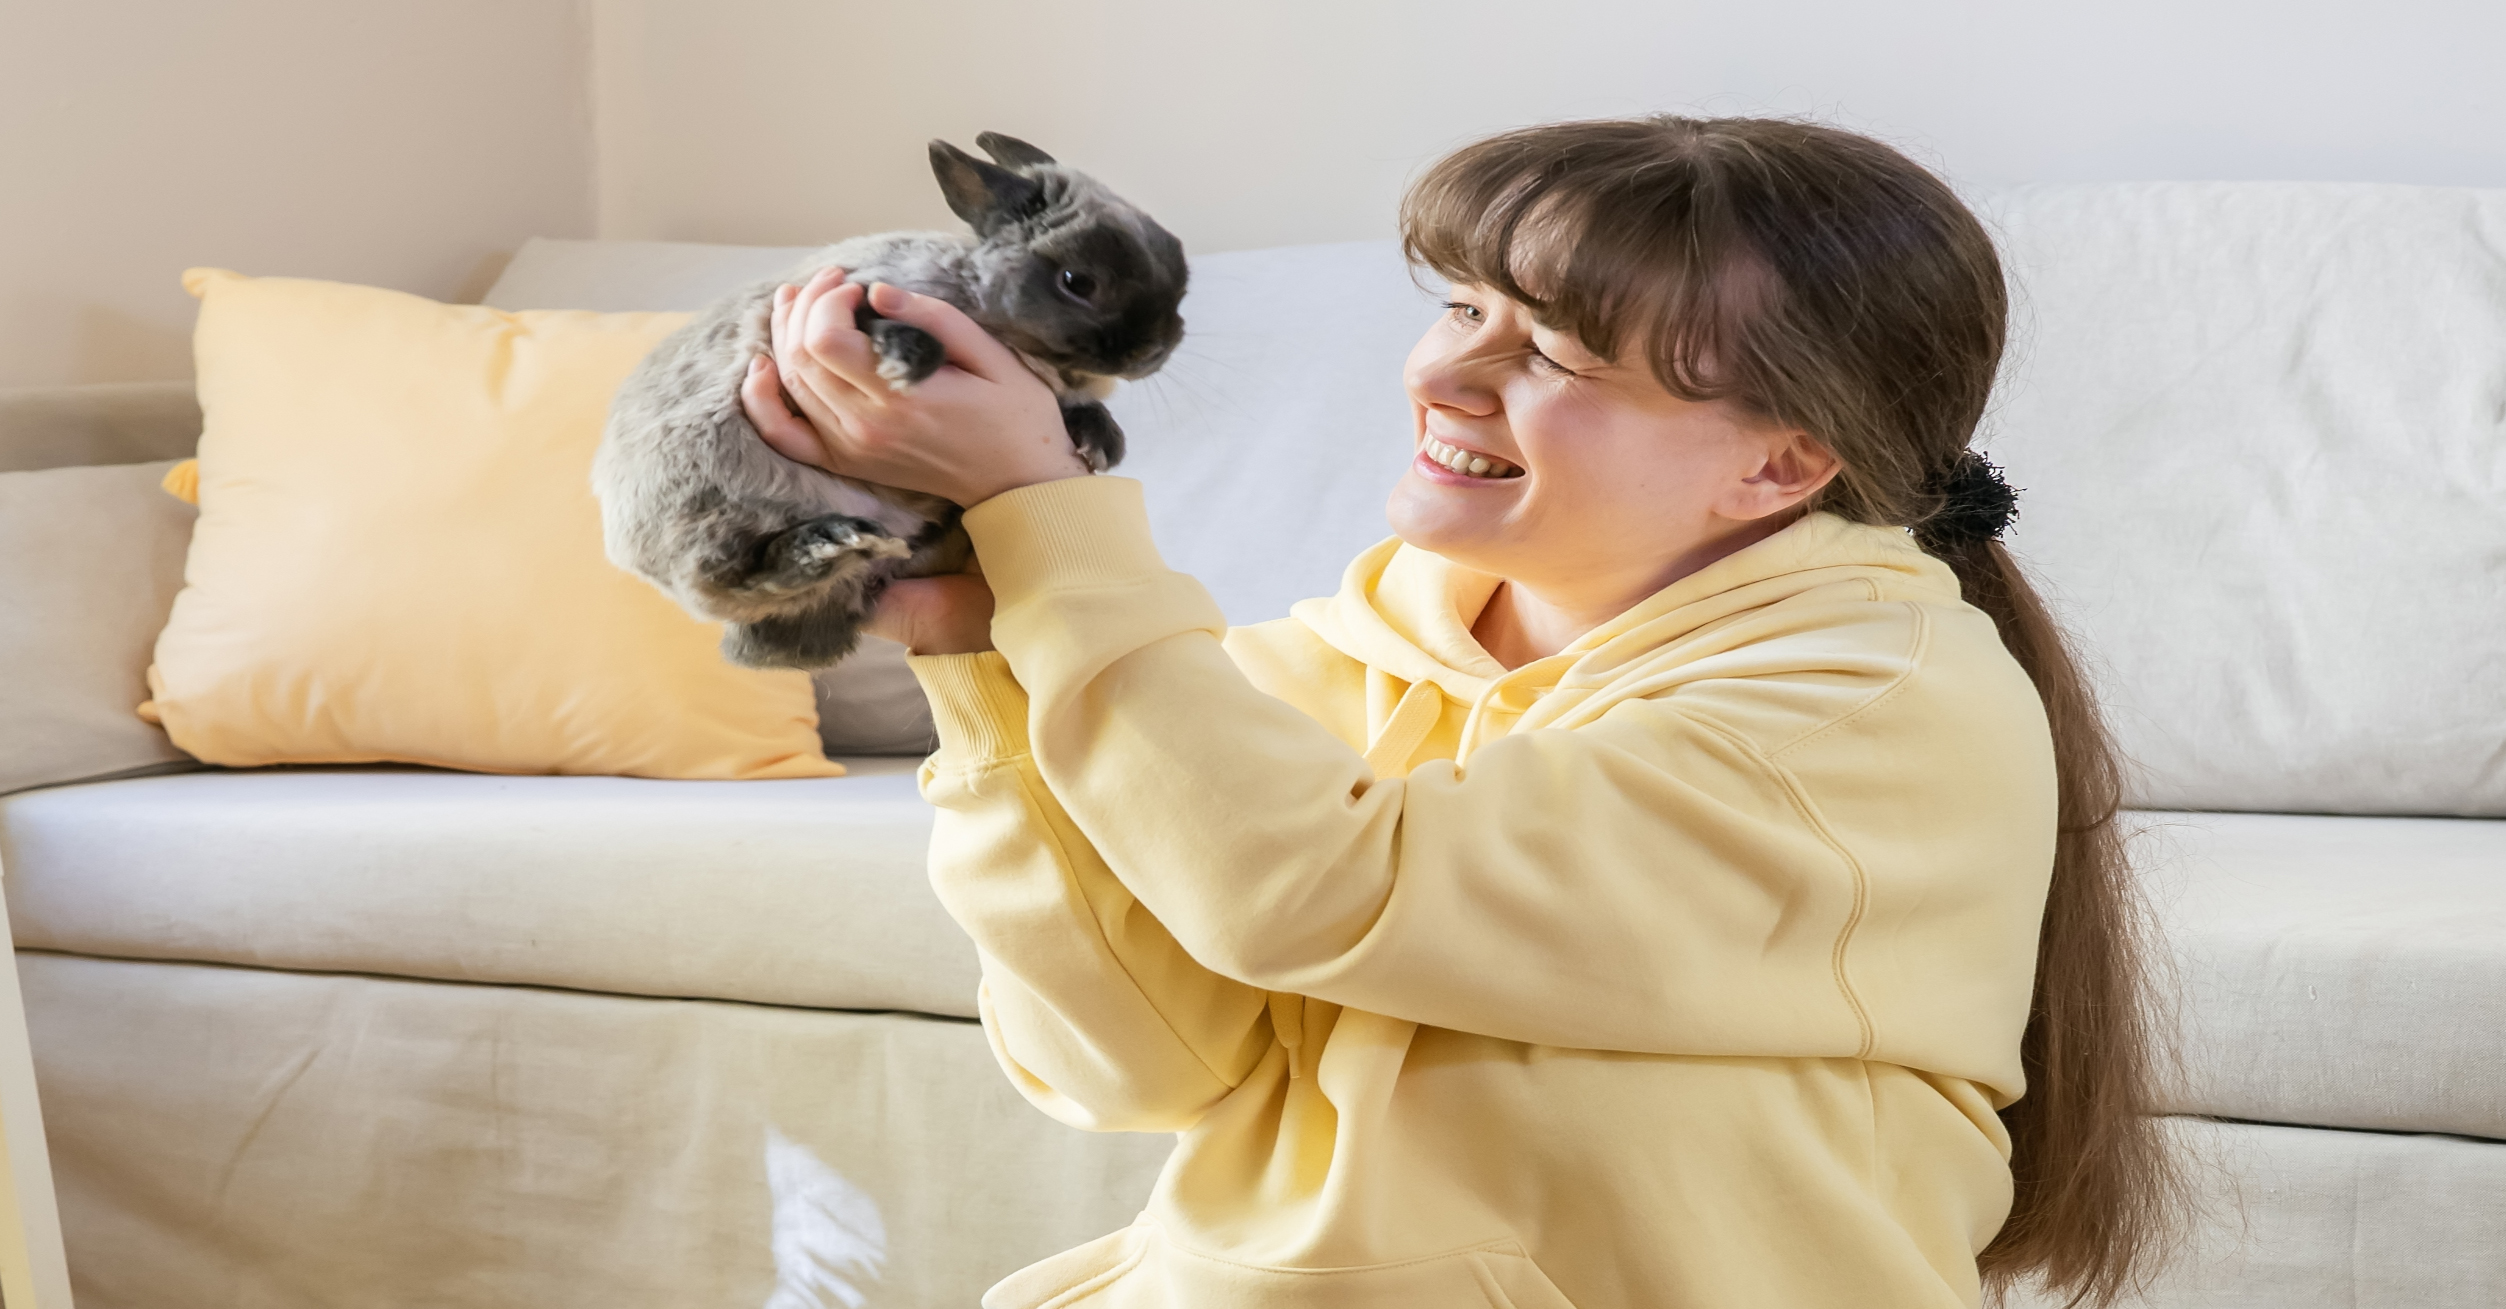 Preventive Pet Care Part 1 What Your Rabbit Needs to Stay Healthy | Hastings Veterinary Hospital